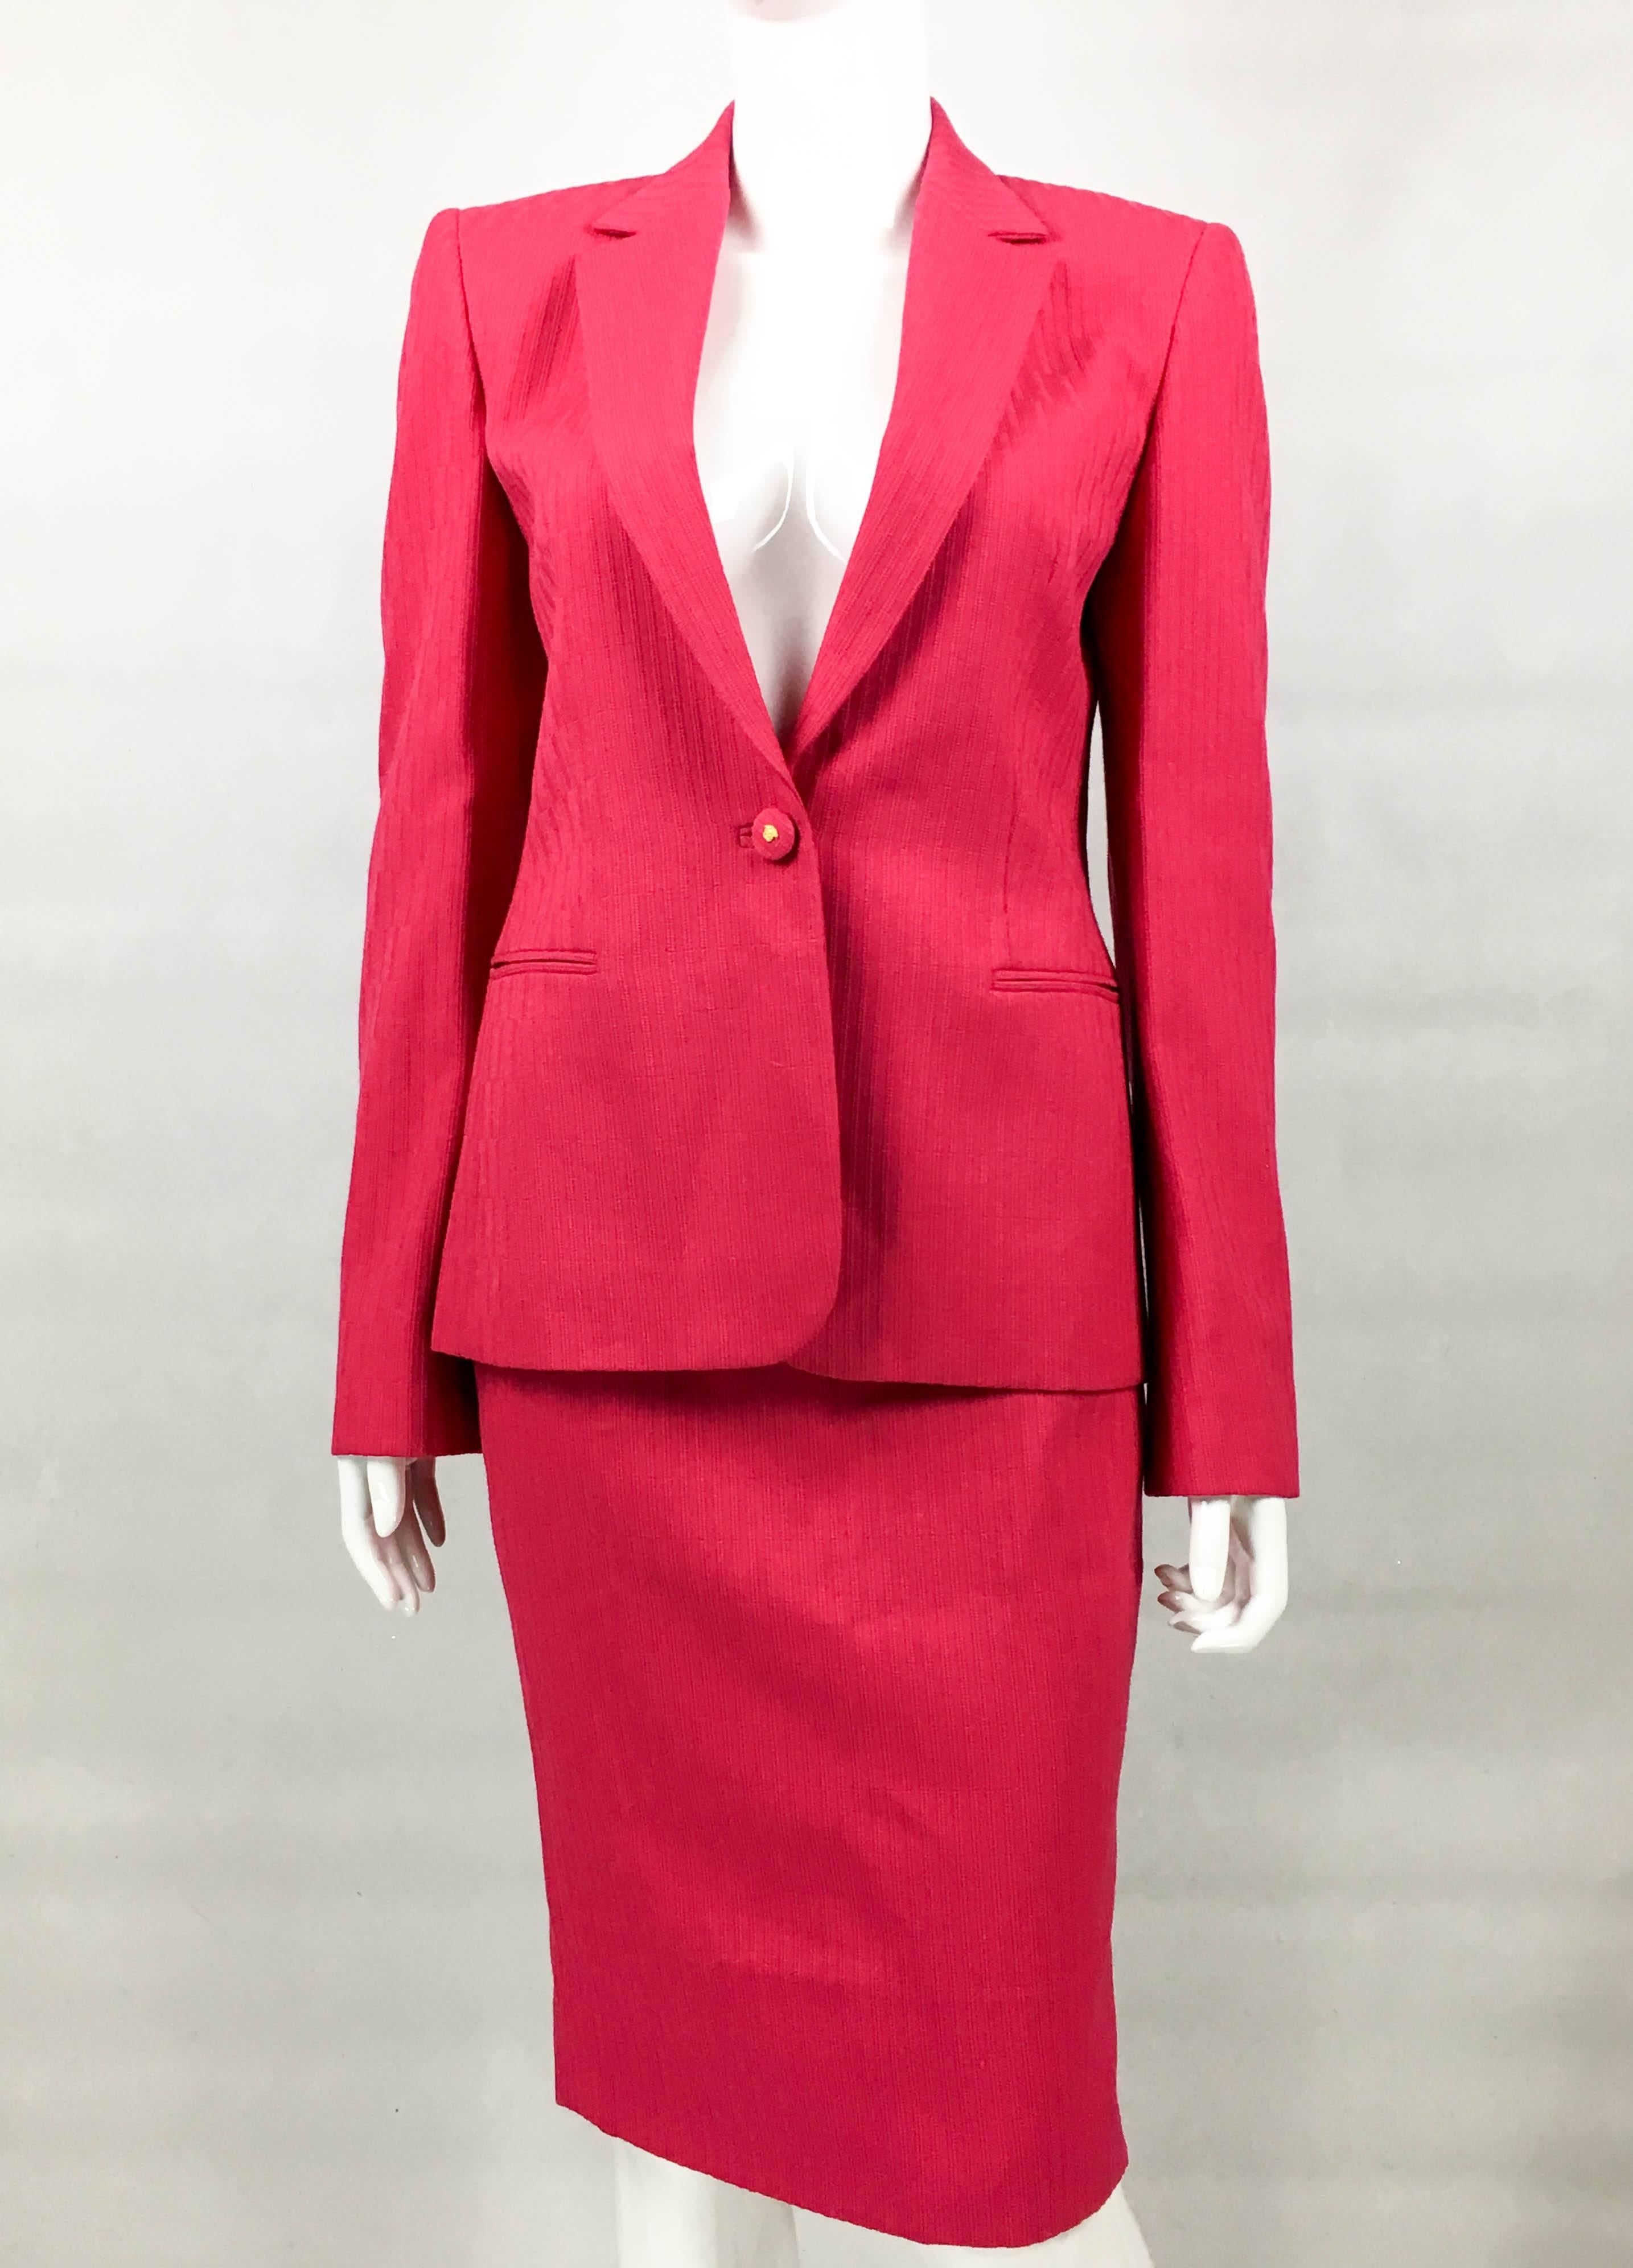 Women's 1980's Gianni Versace Couture Shocking Pink Wool Skirt Suit